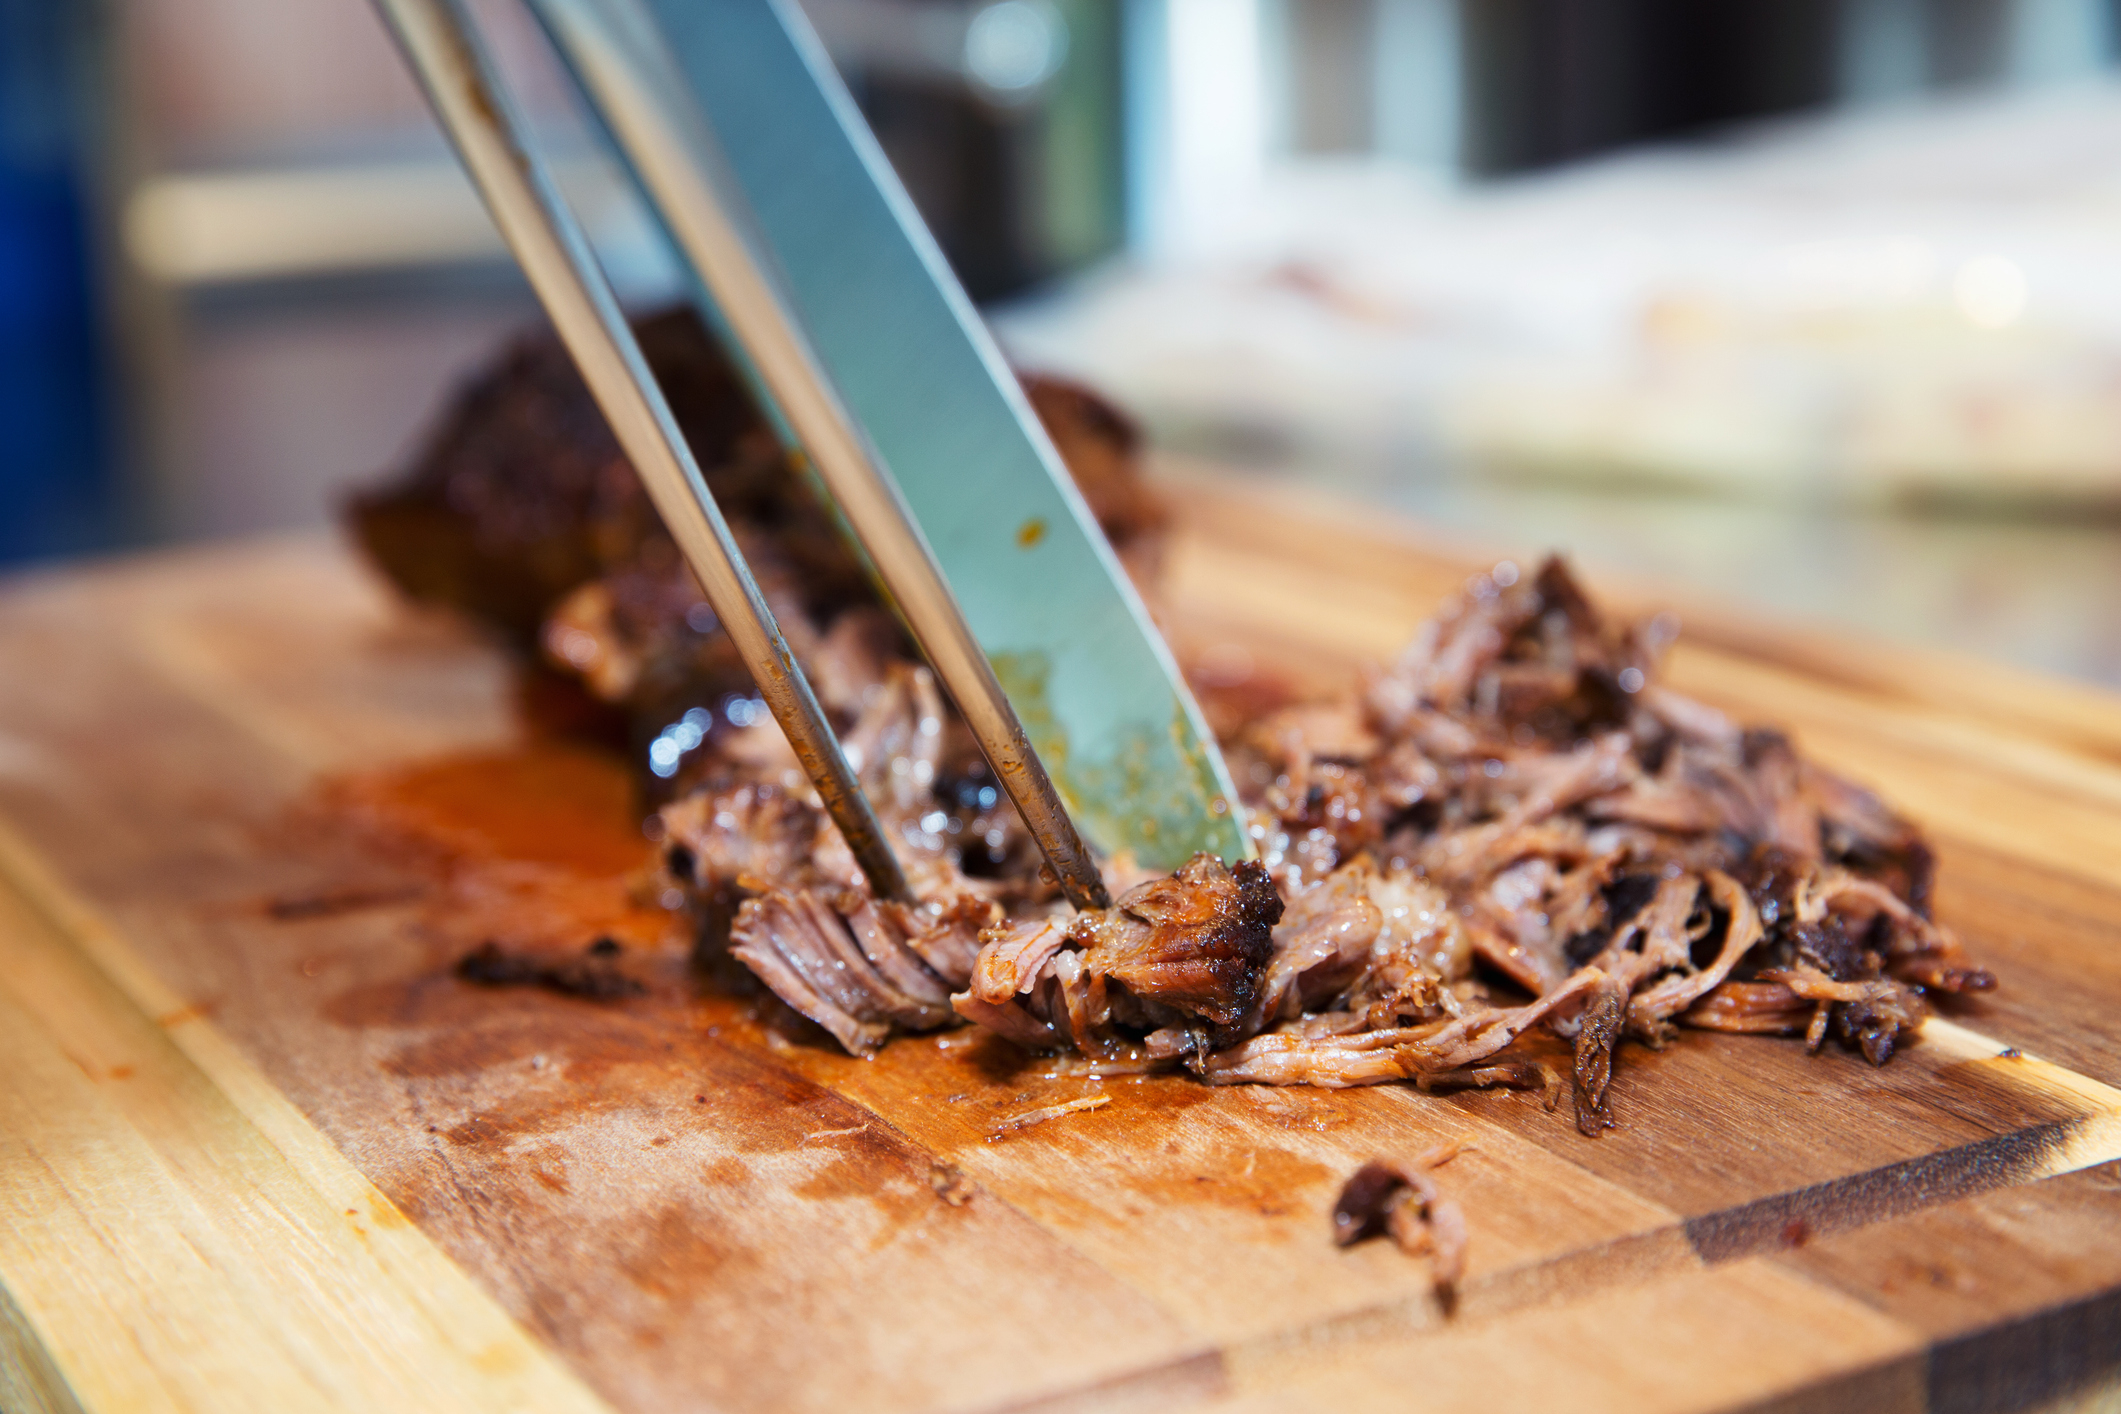 Shredded meat on a cutting board with tongs pulling it apart